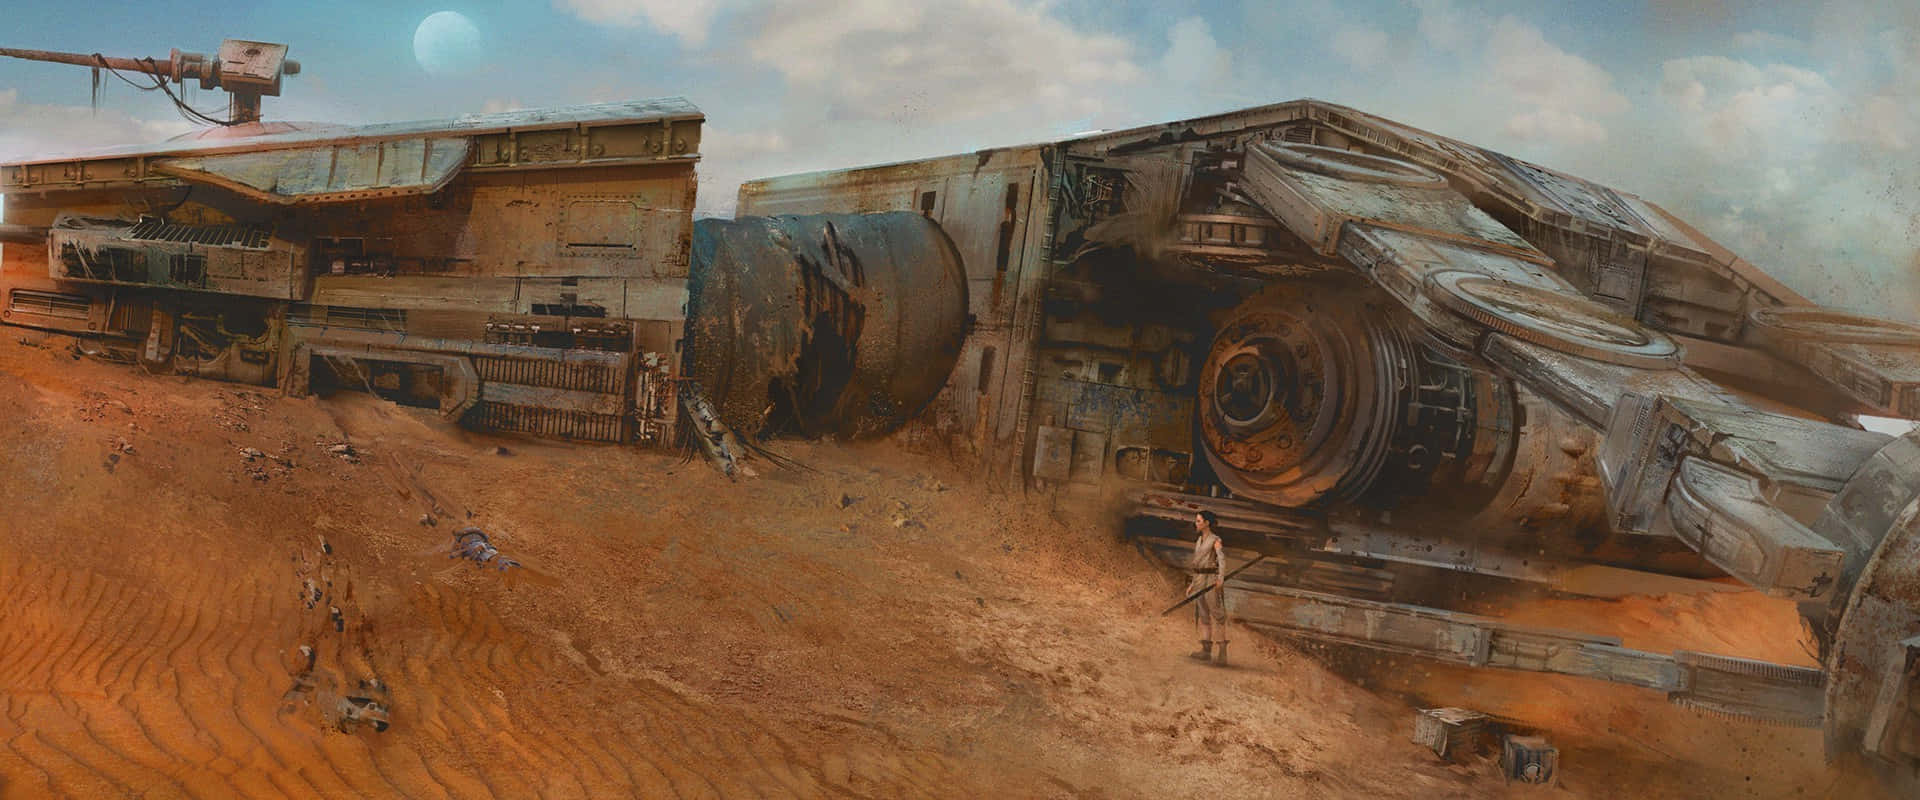 A panoramic view of Jakku's desert and abandoned structures Wallpaper